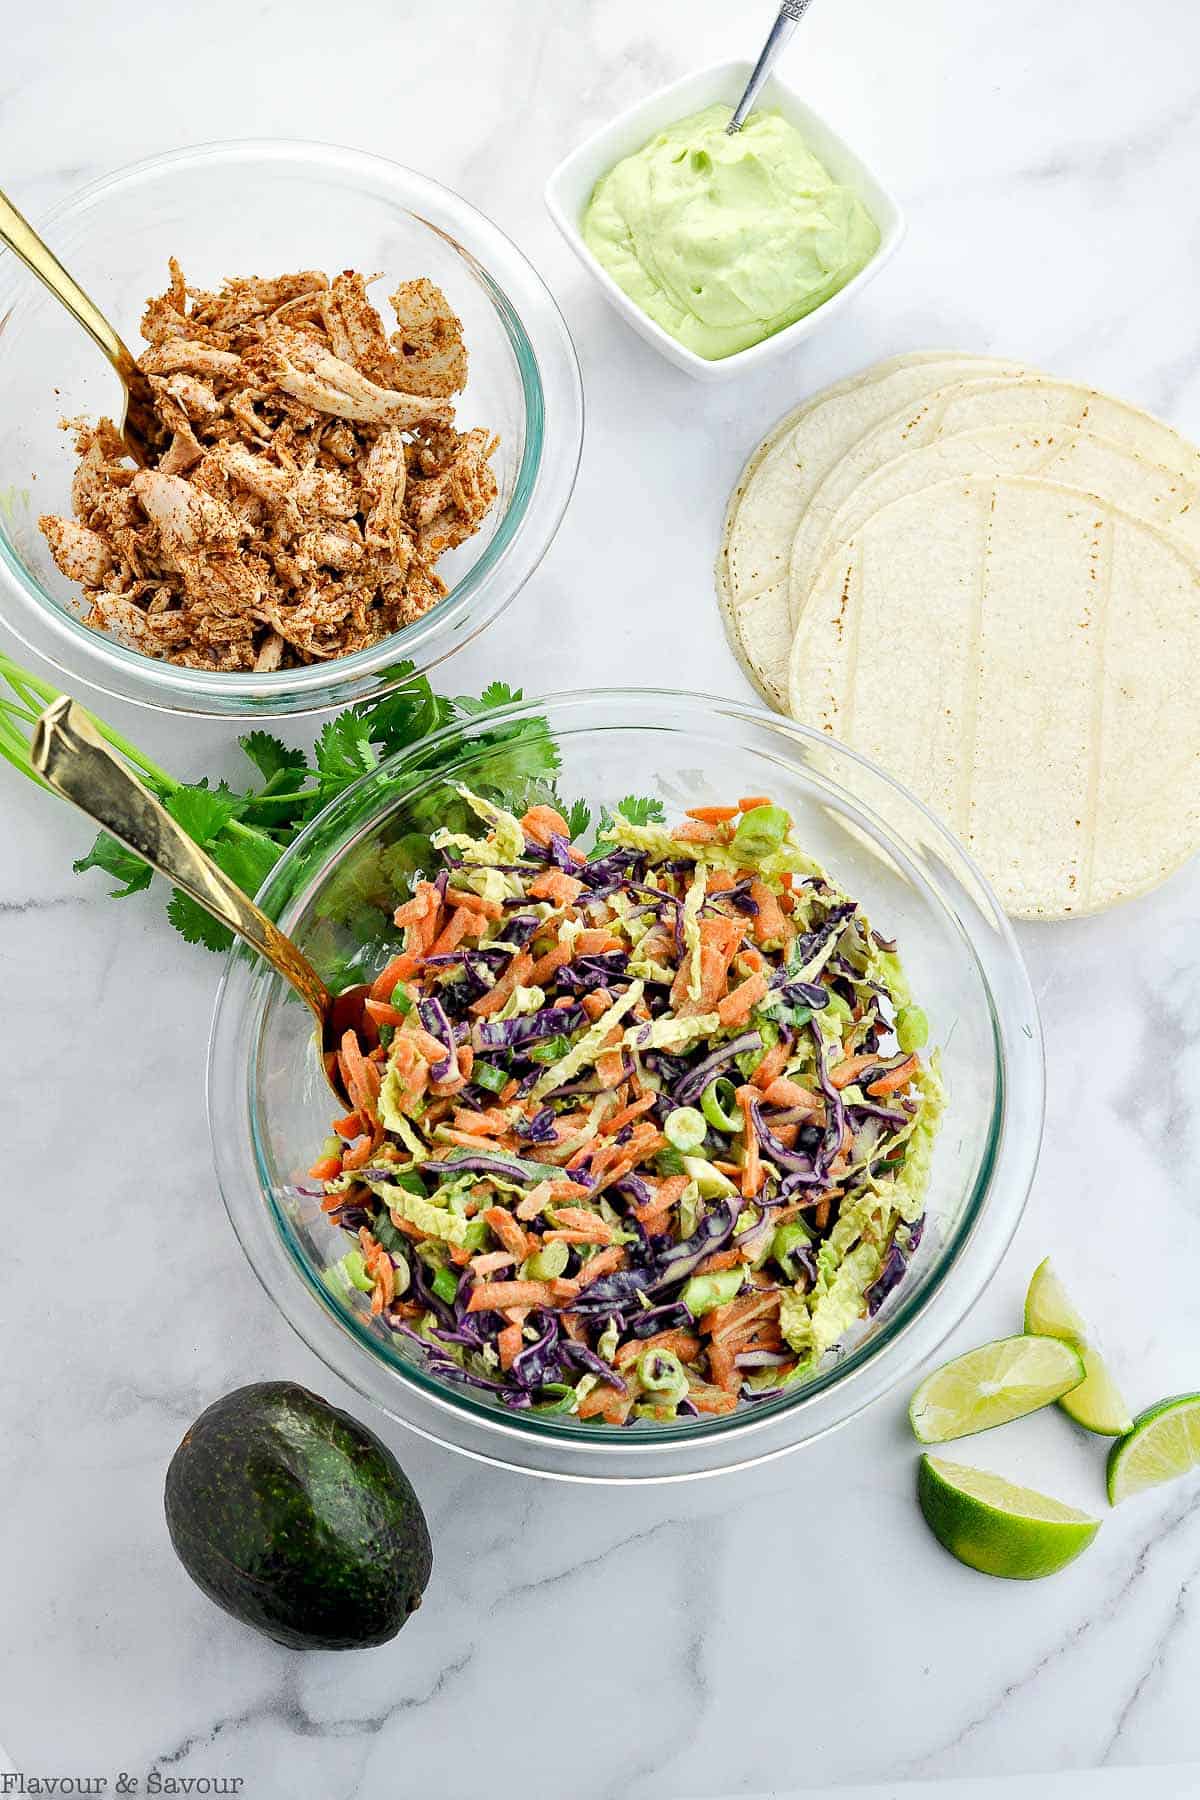 Ingredients for Shredded Chicken Tacos with Cilantro Lime Slaw